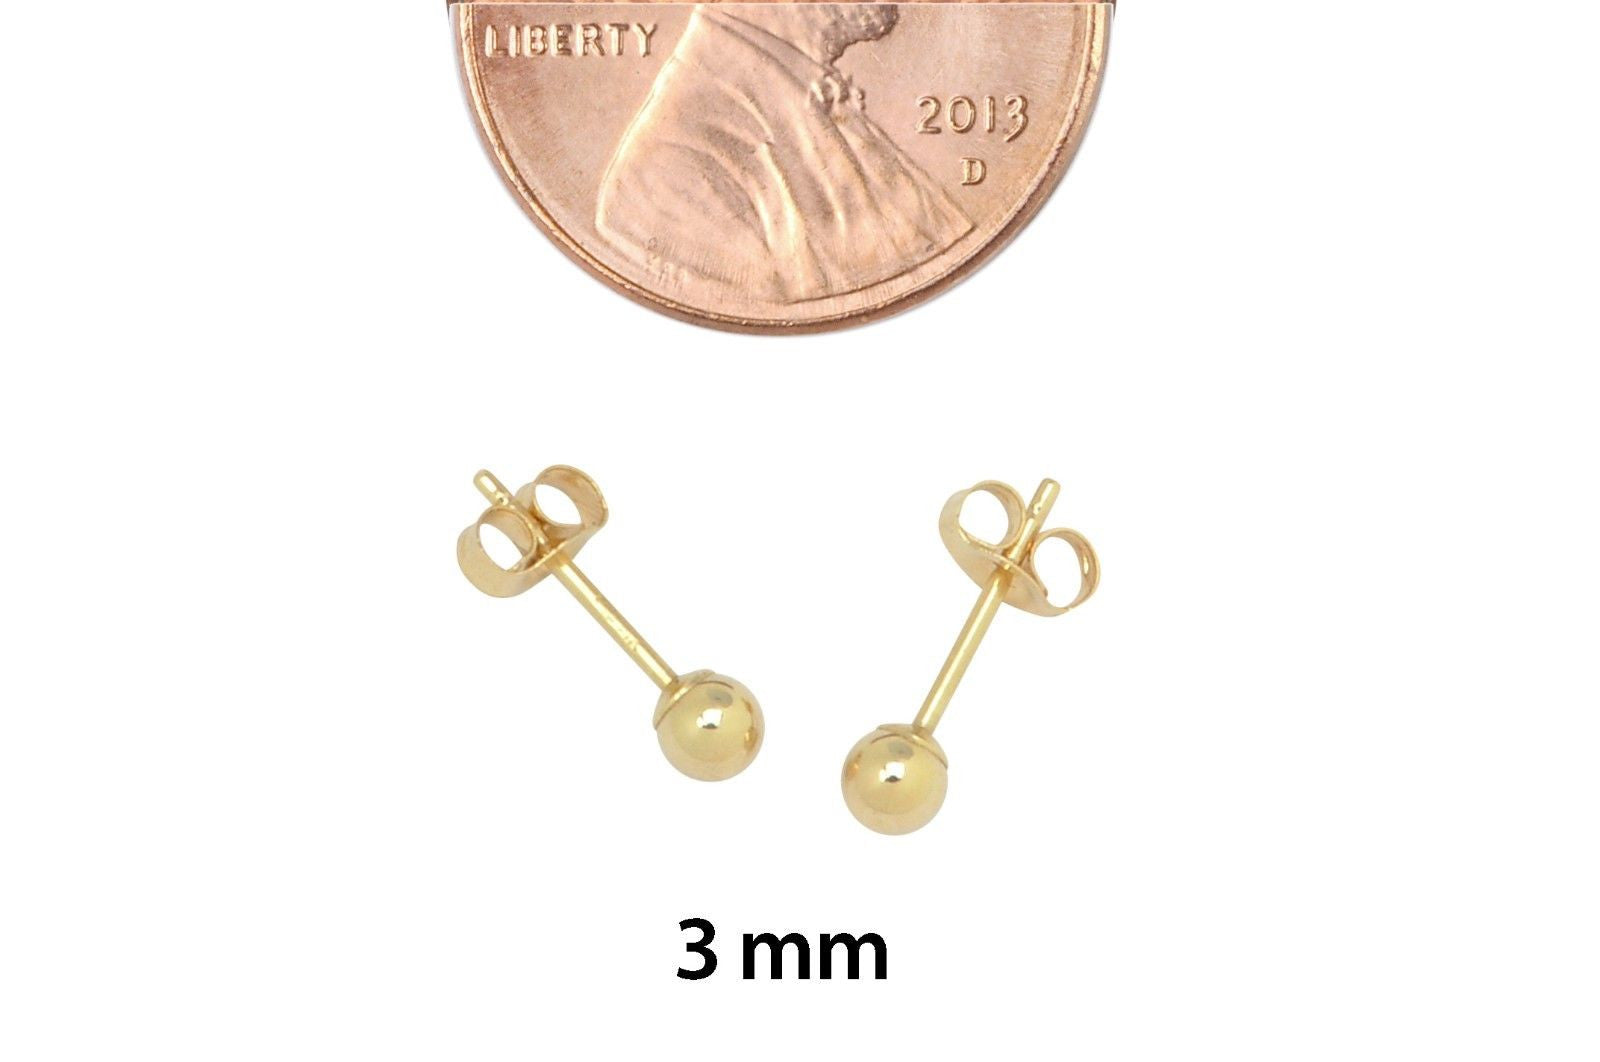 14K Yellow Gold Ball Push Back Studs Tiny Earring Stud Dainty Ball Stud  Second Hole Earrings Gold Ball Stud available in 2mm-10mm 